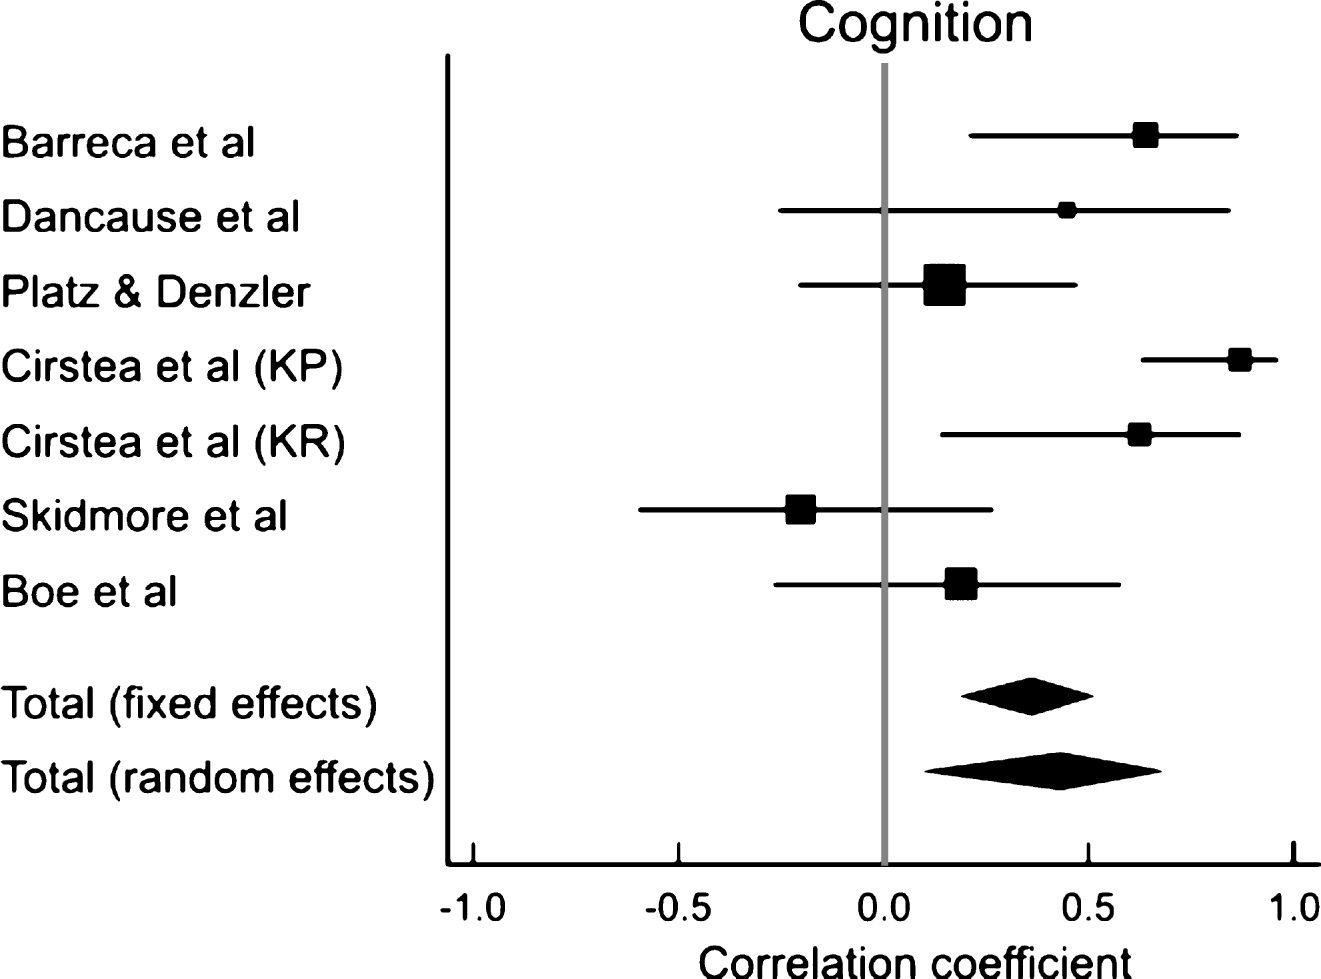 Results of a meta-analysis examining the correlation between cognition and arm motor improvement. Larger squares represent larger study effect sizes. Diamonds indicate the pooled effects of results of individual studies. Diamond location indicates the estimated effect size and diamond width reflects the precision of the estimate.